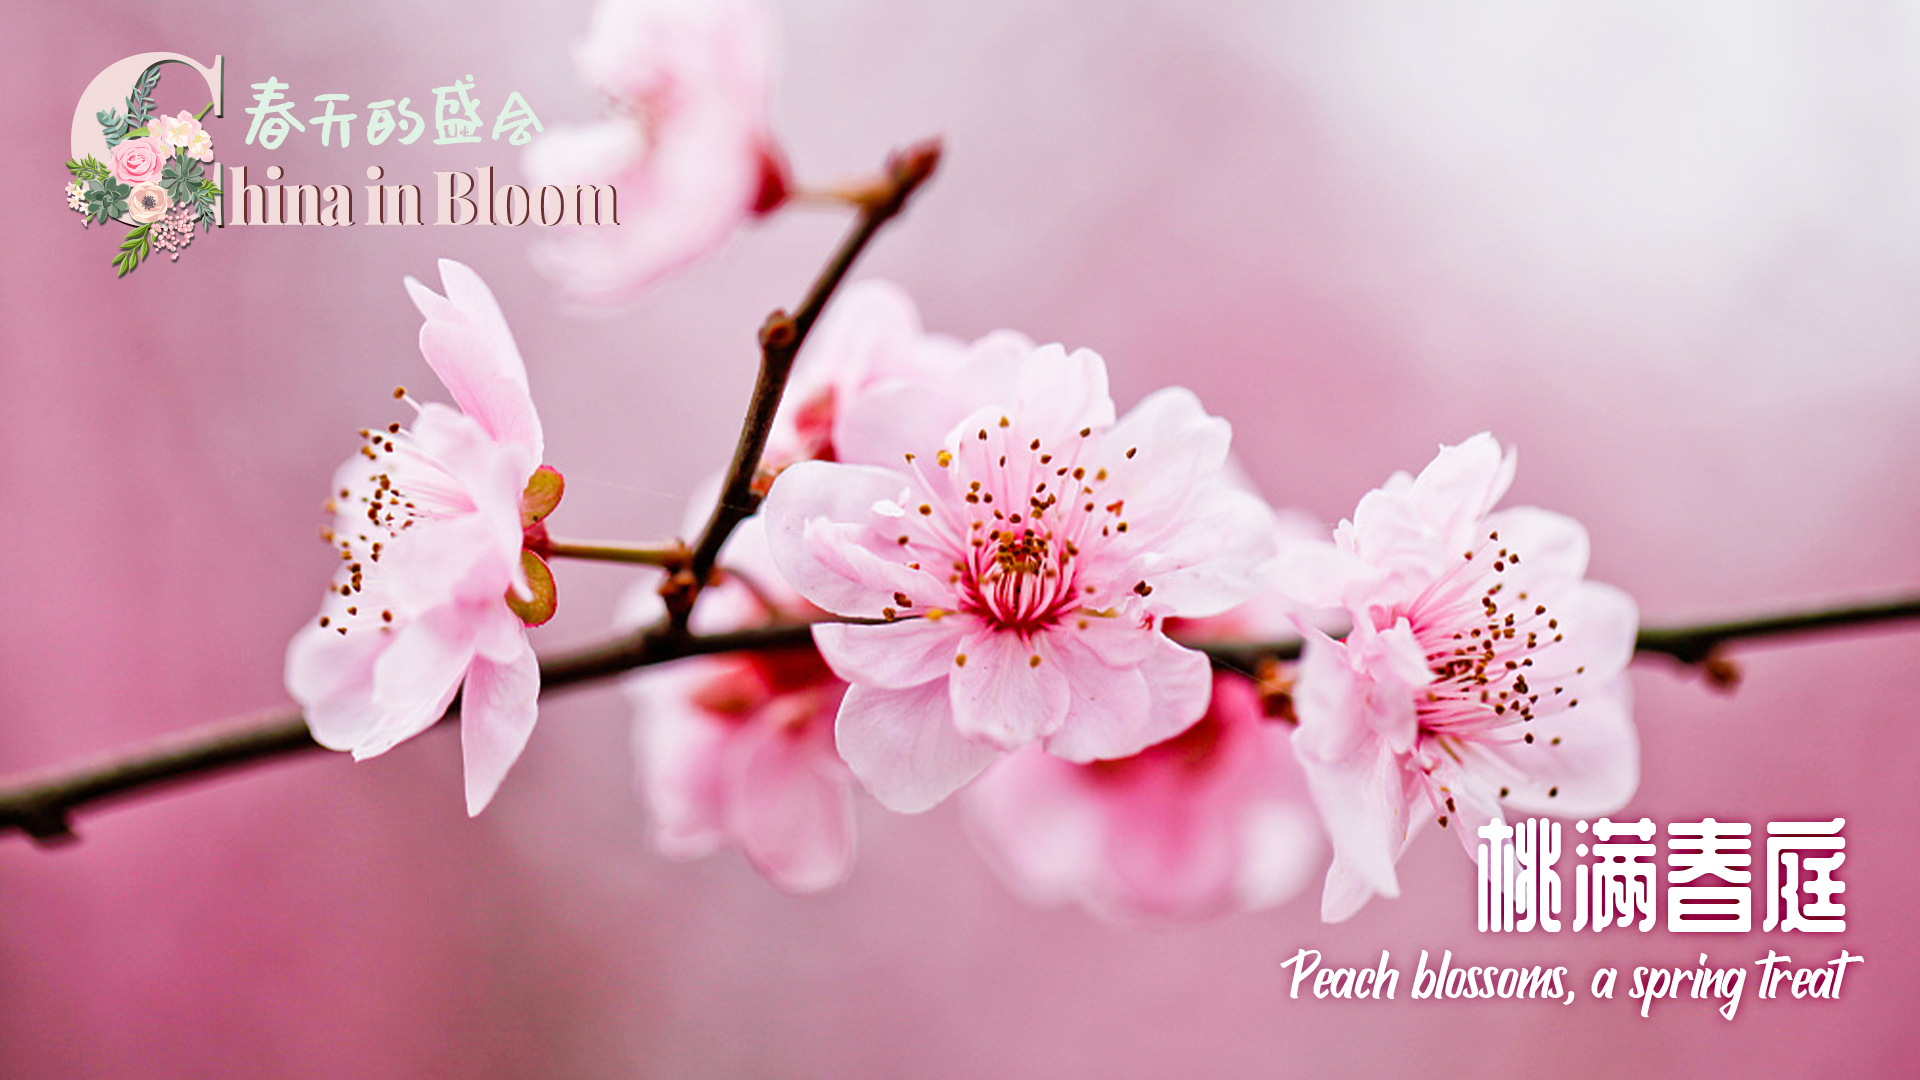 China in Bloom: A symbol of love and well-being, a sign of spring